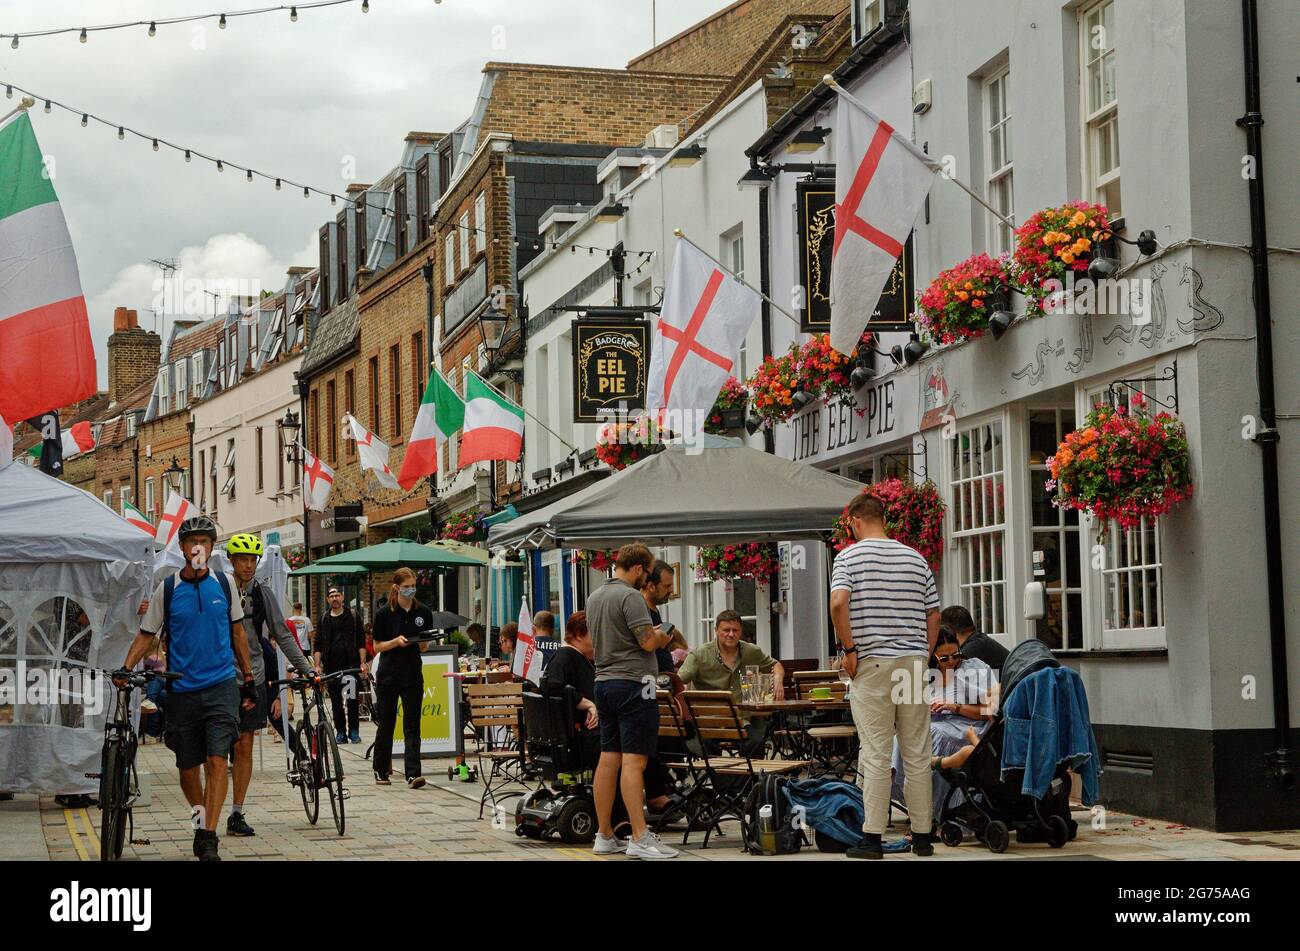 Outside the Eel Pie pub drinking in Church Street, Twickenham festooned with England flags for Euro 2020 before the final game. Stock Photo